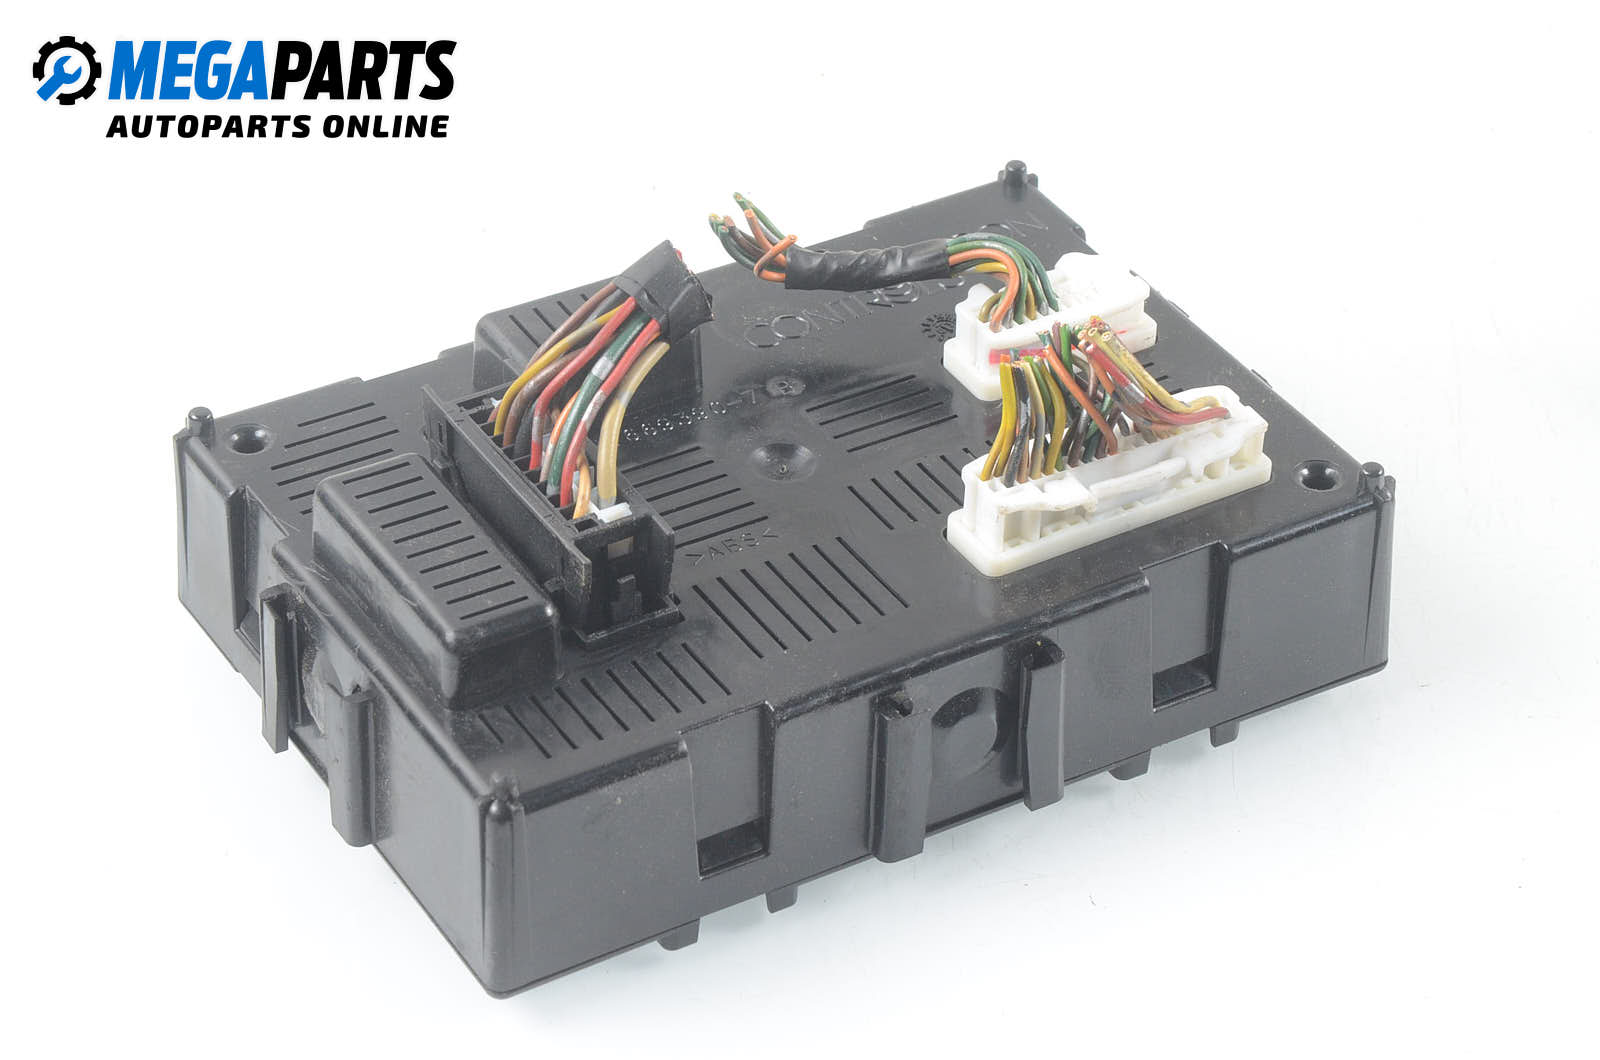 Bcm Module For Nissan Micra (K12) 1.5 Dci, 65 Hp, Hatchback, 2003 № 284B2Ax620 Price: € 17.25